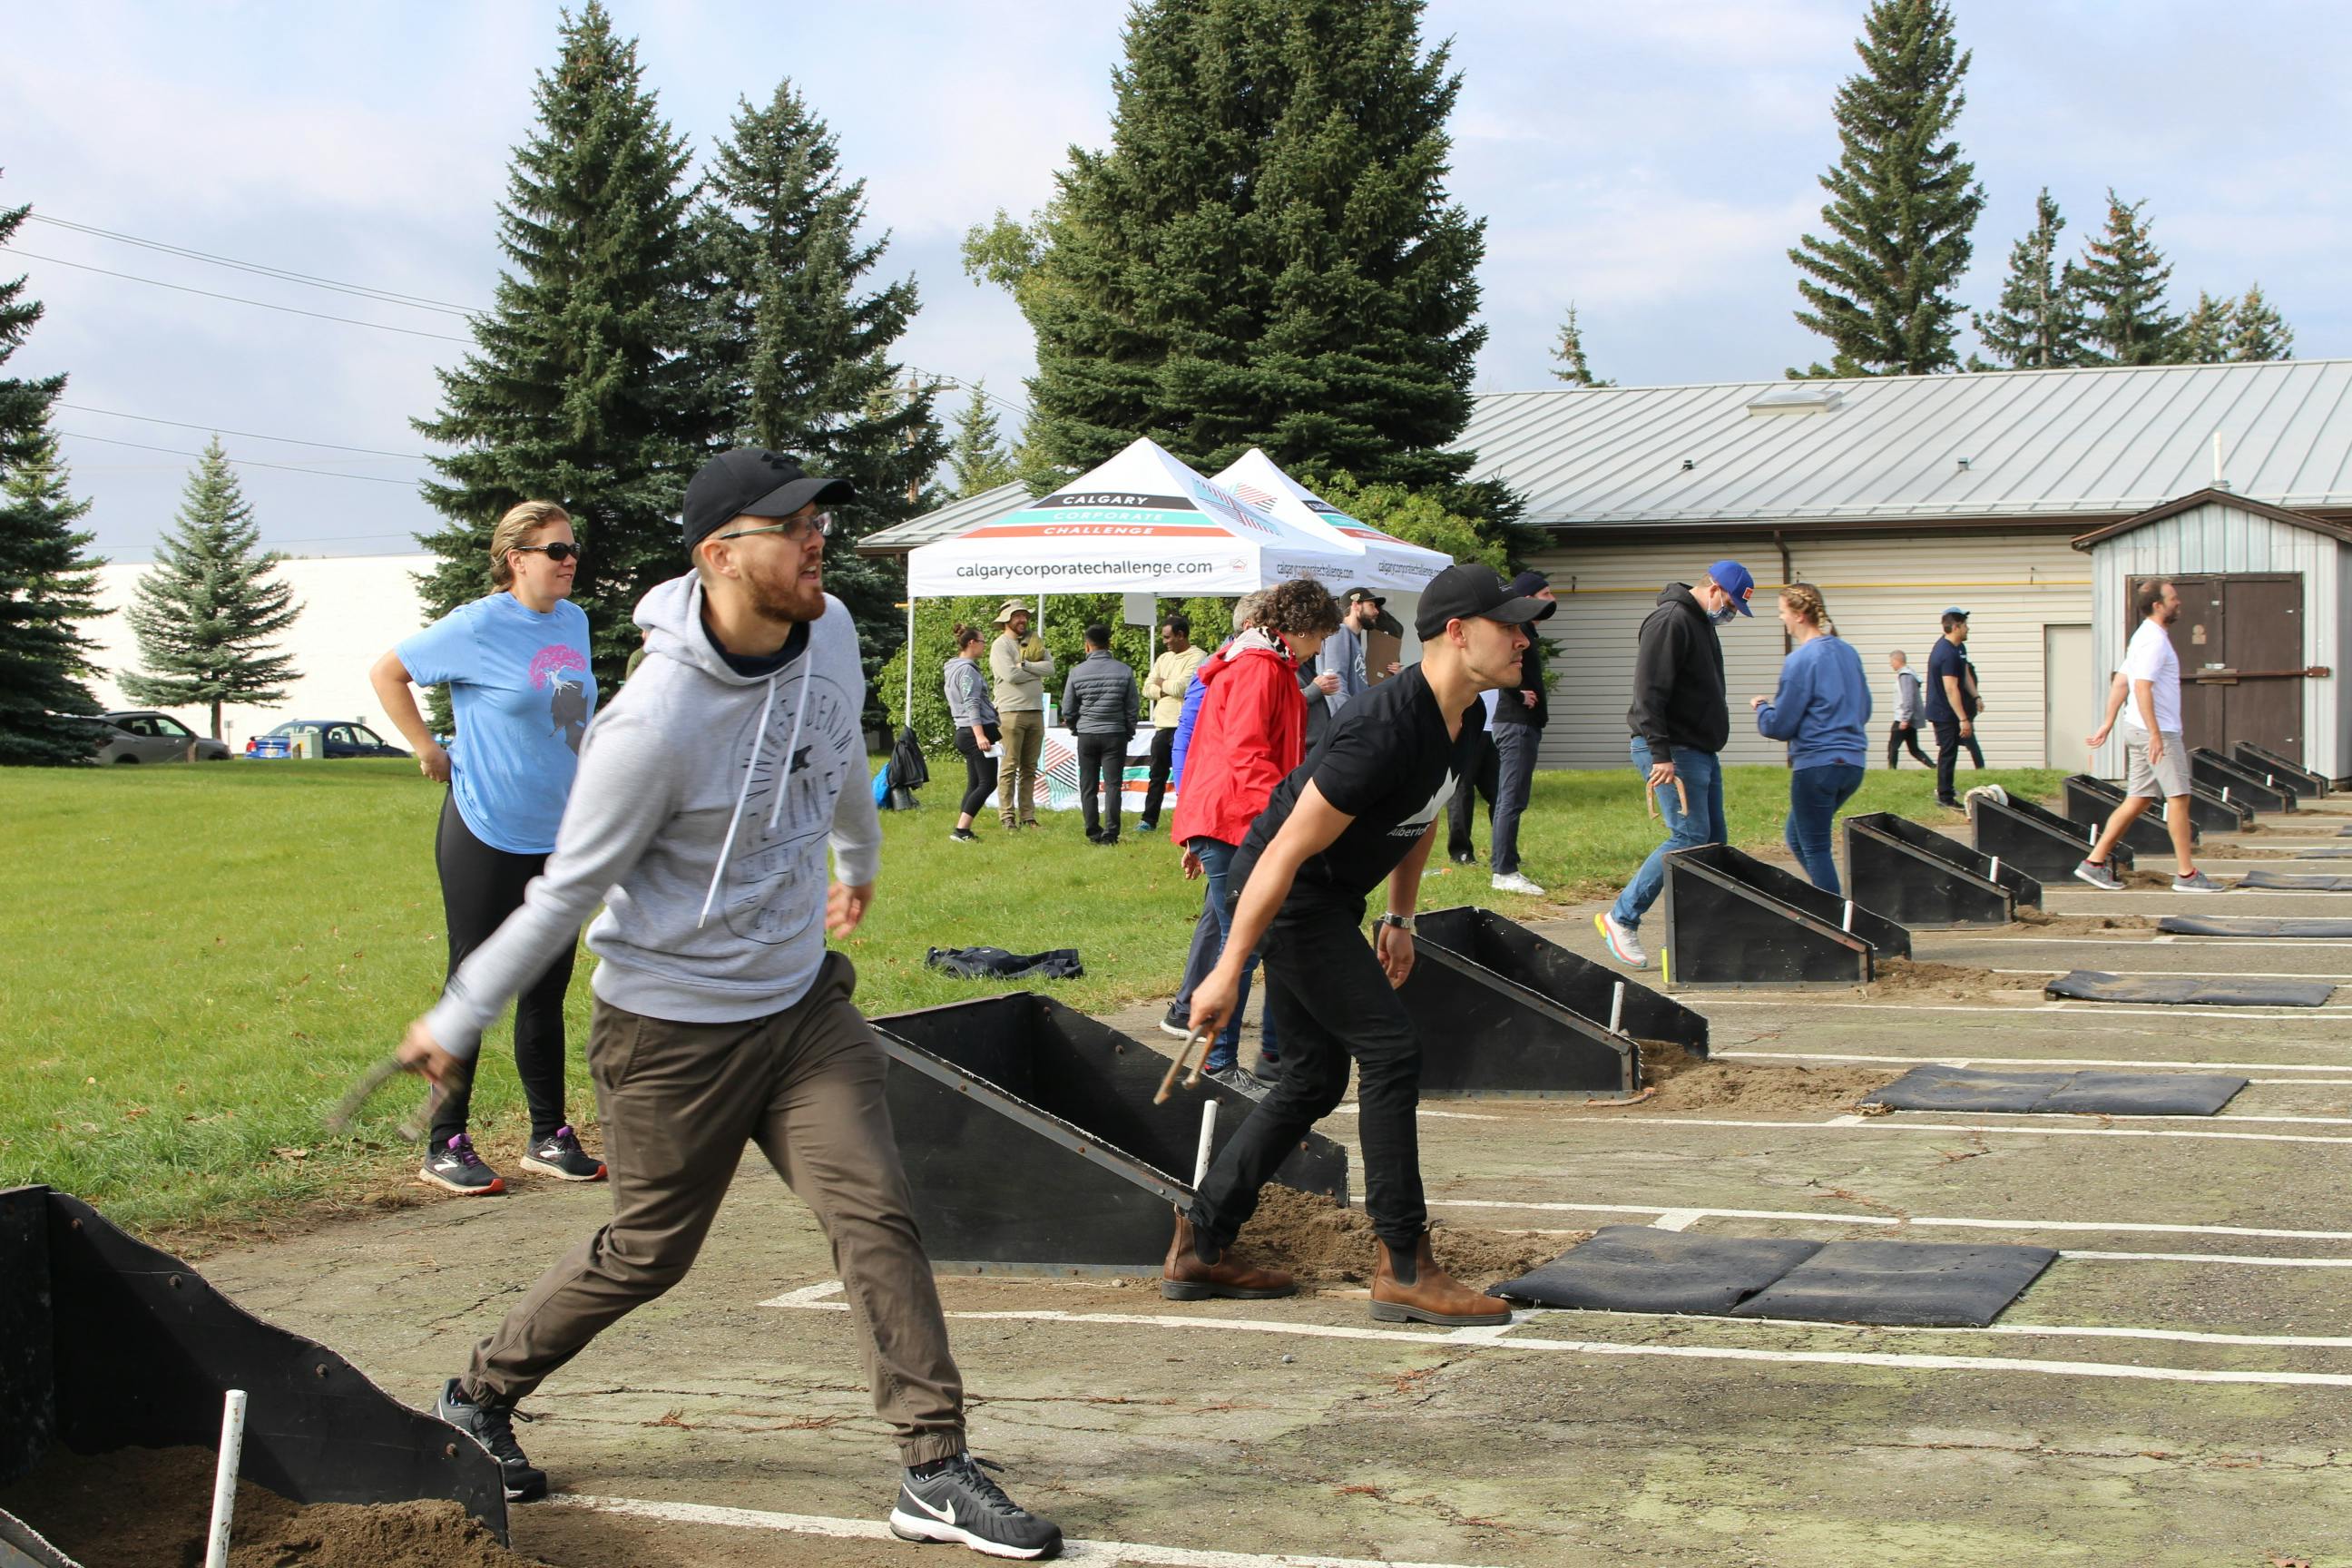 participants throwing horseshoes